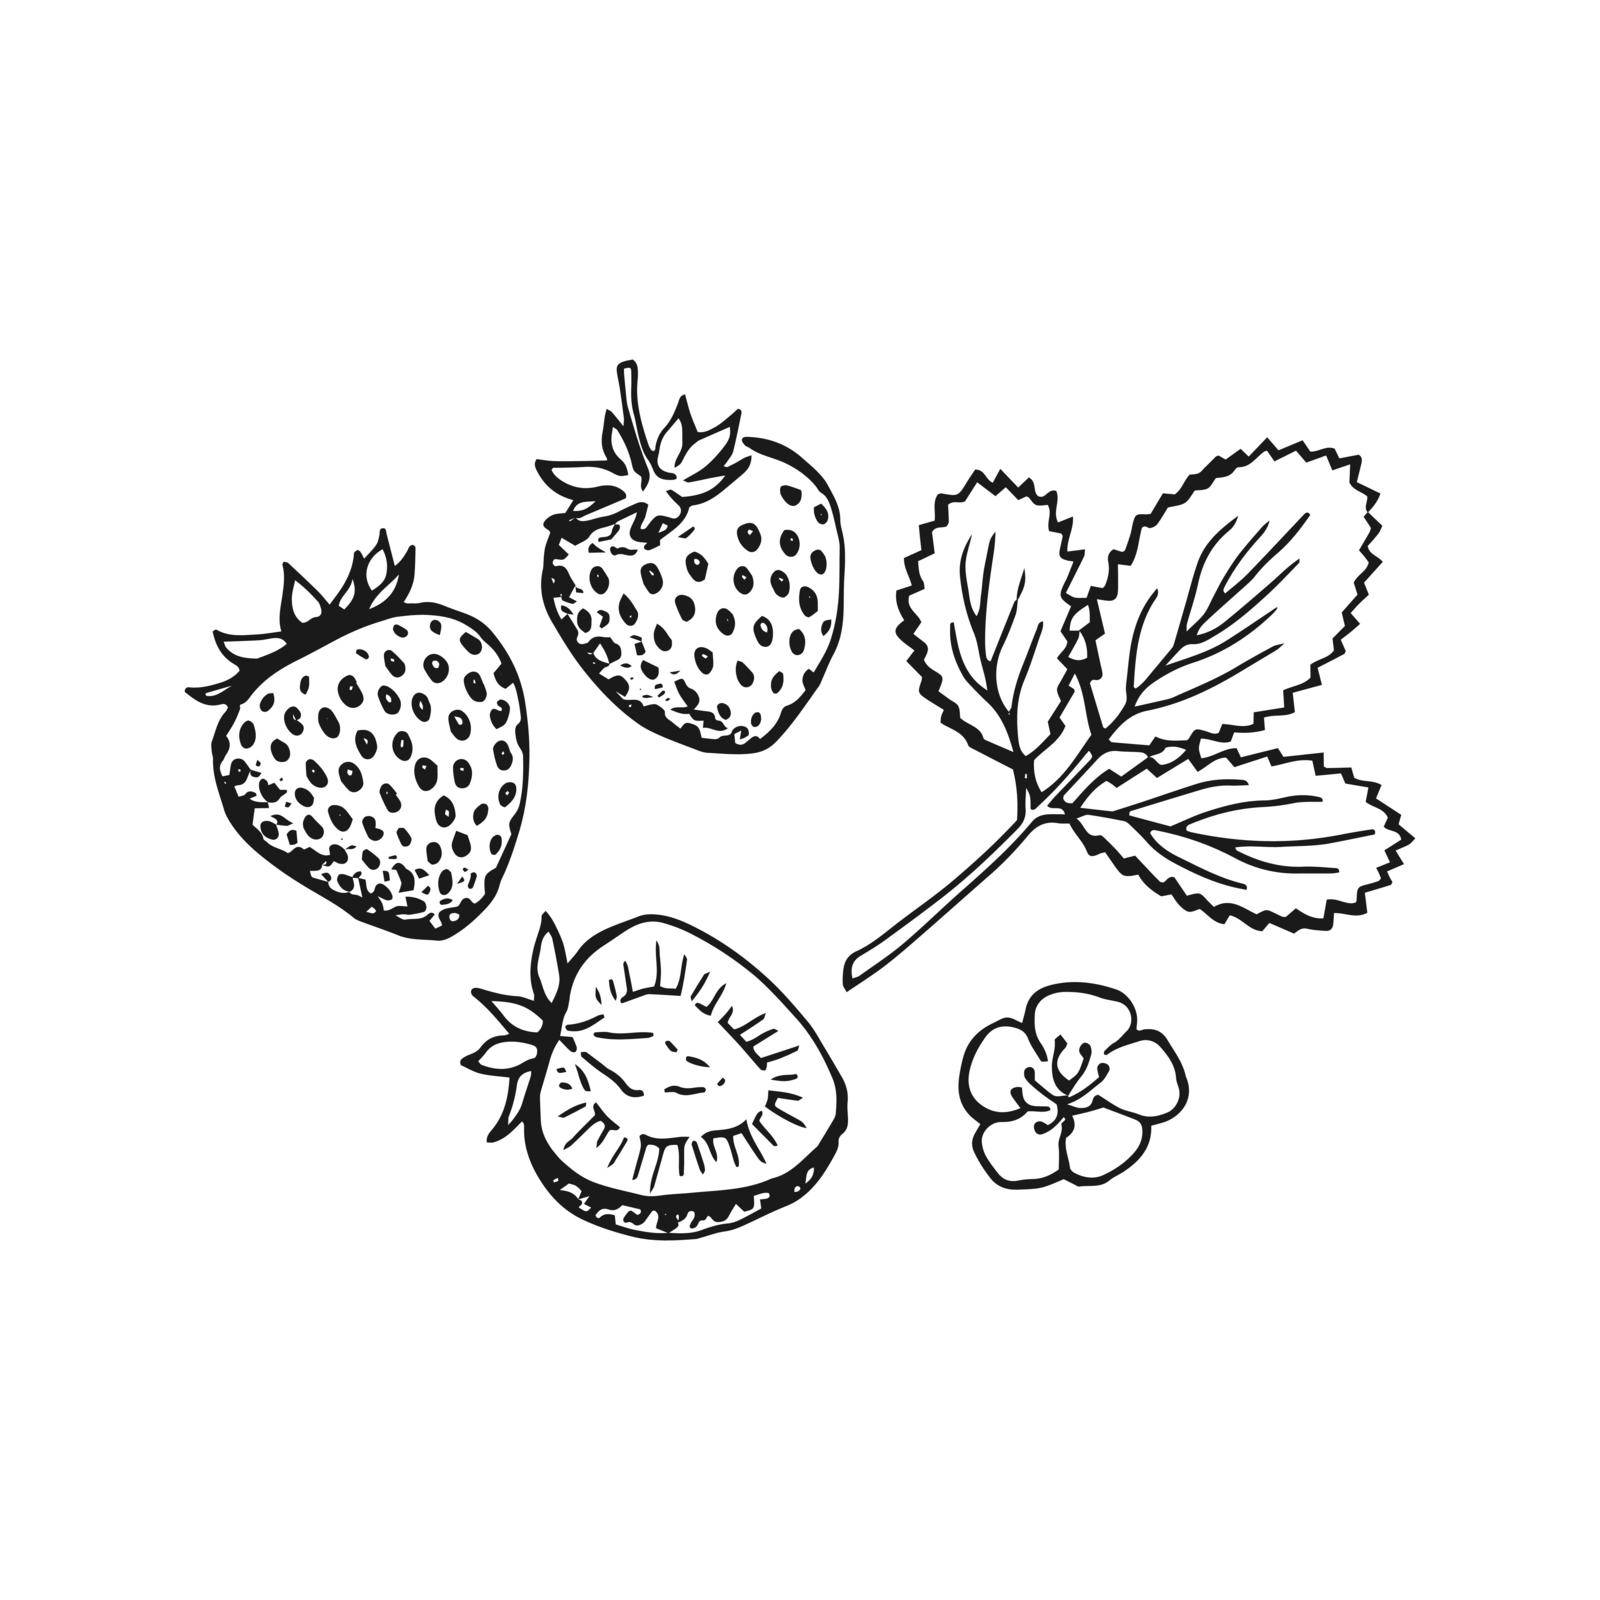 Strawberry. Hand drawn illustration converted to vector.